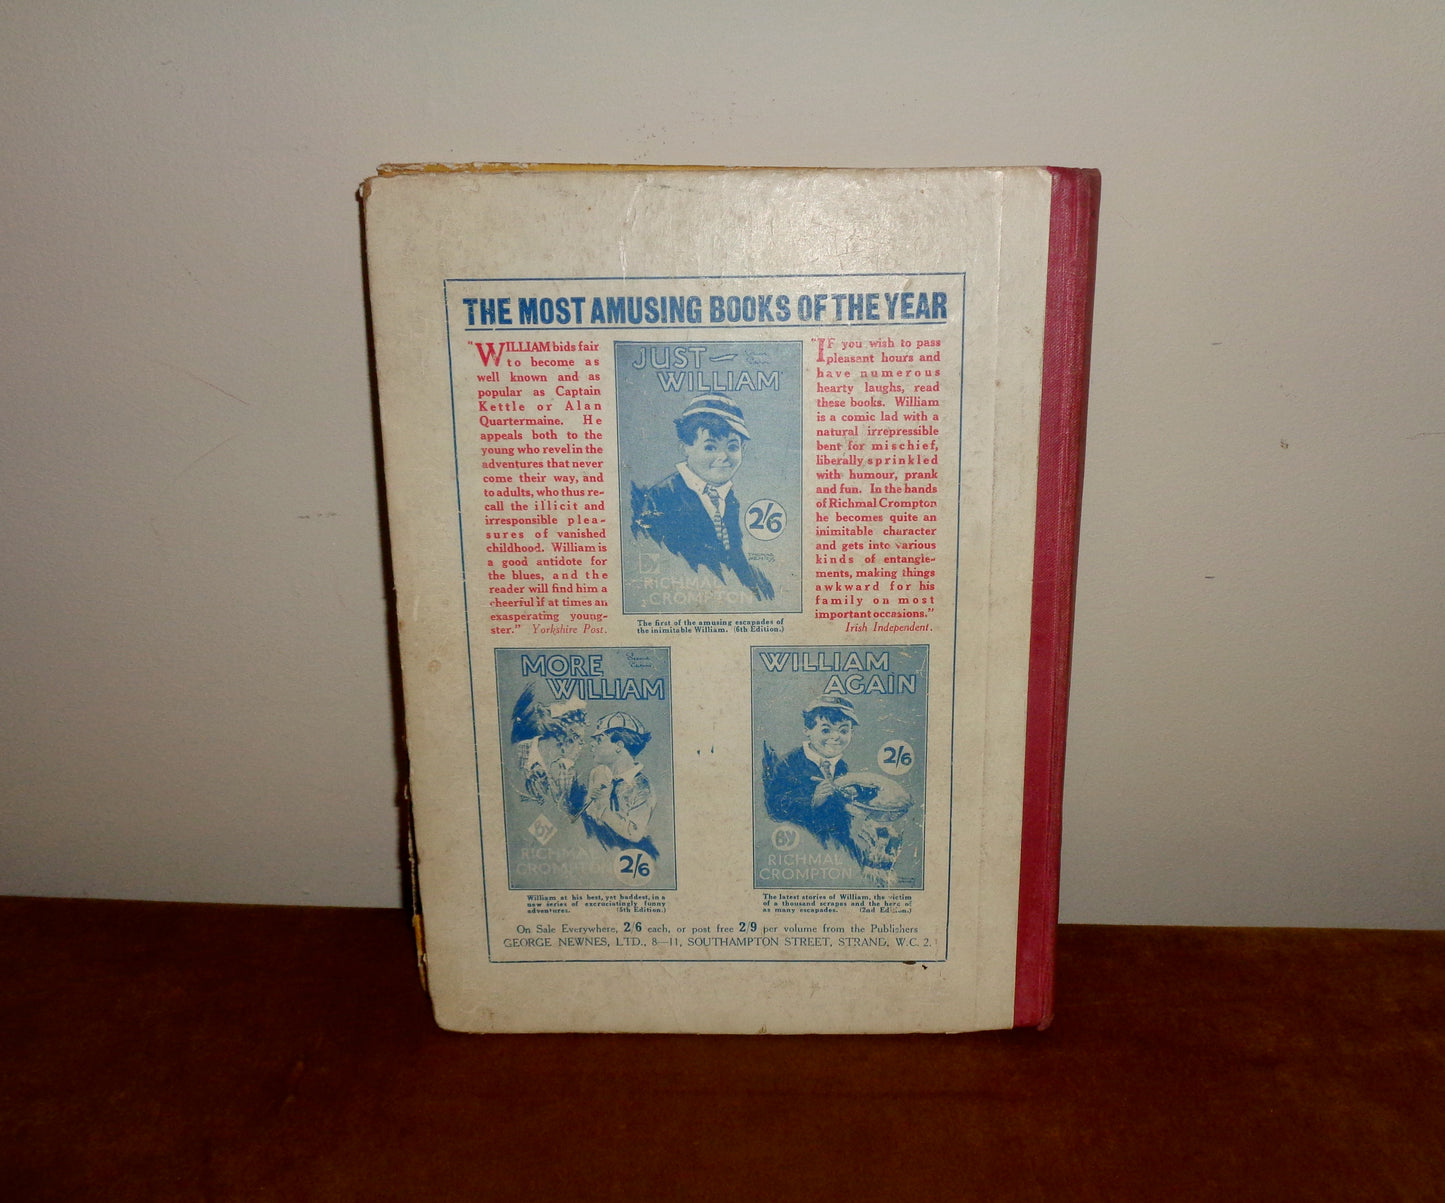 1923 The Boys' Wireless Book Published By George Newnes